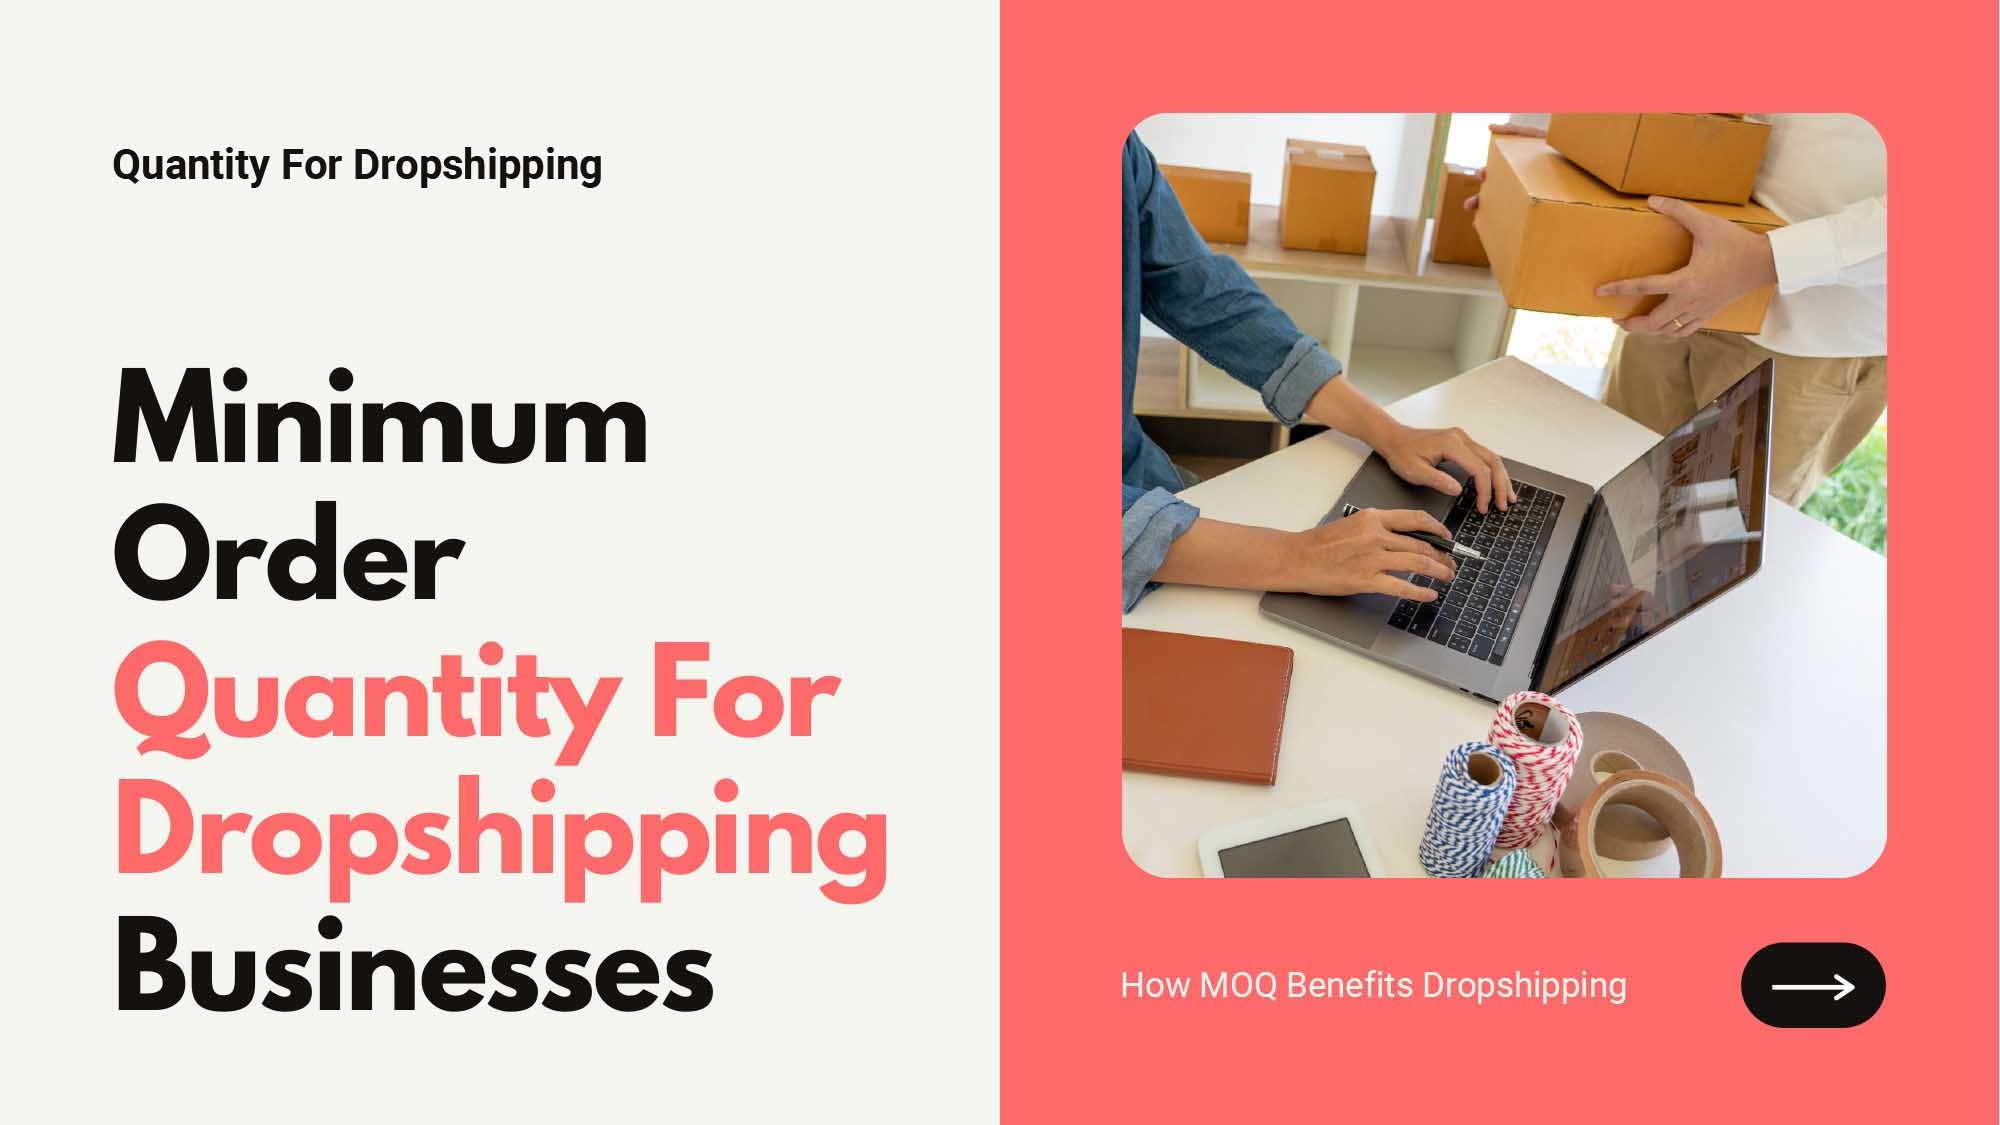 How To Negotiate A Minimum Order Quantity For Dropshipping